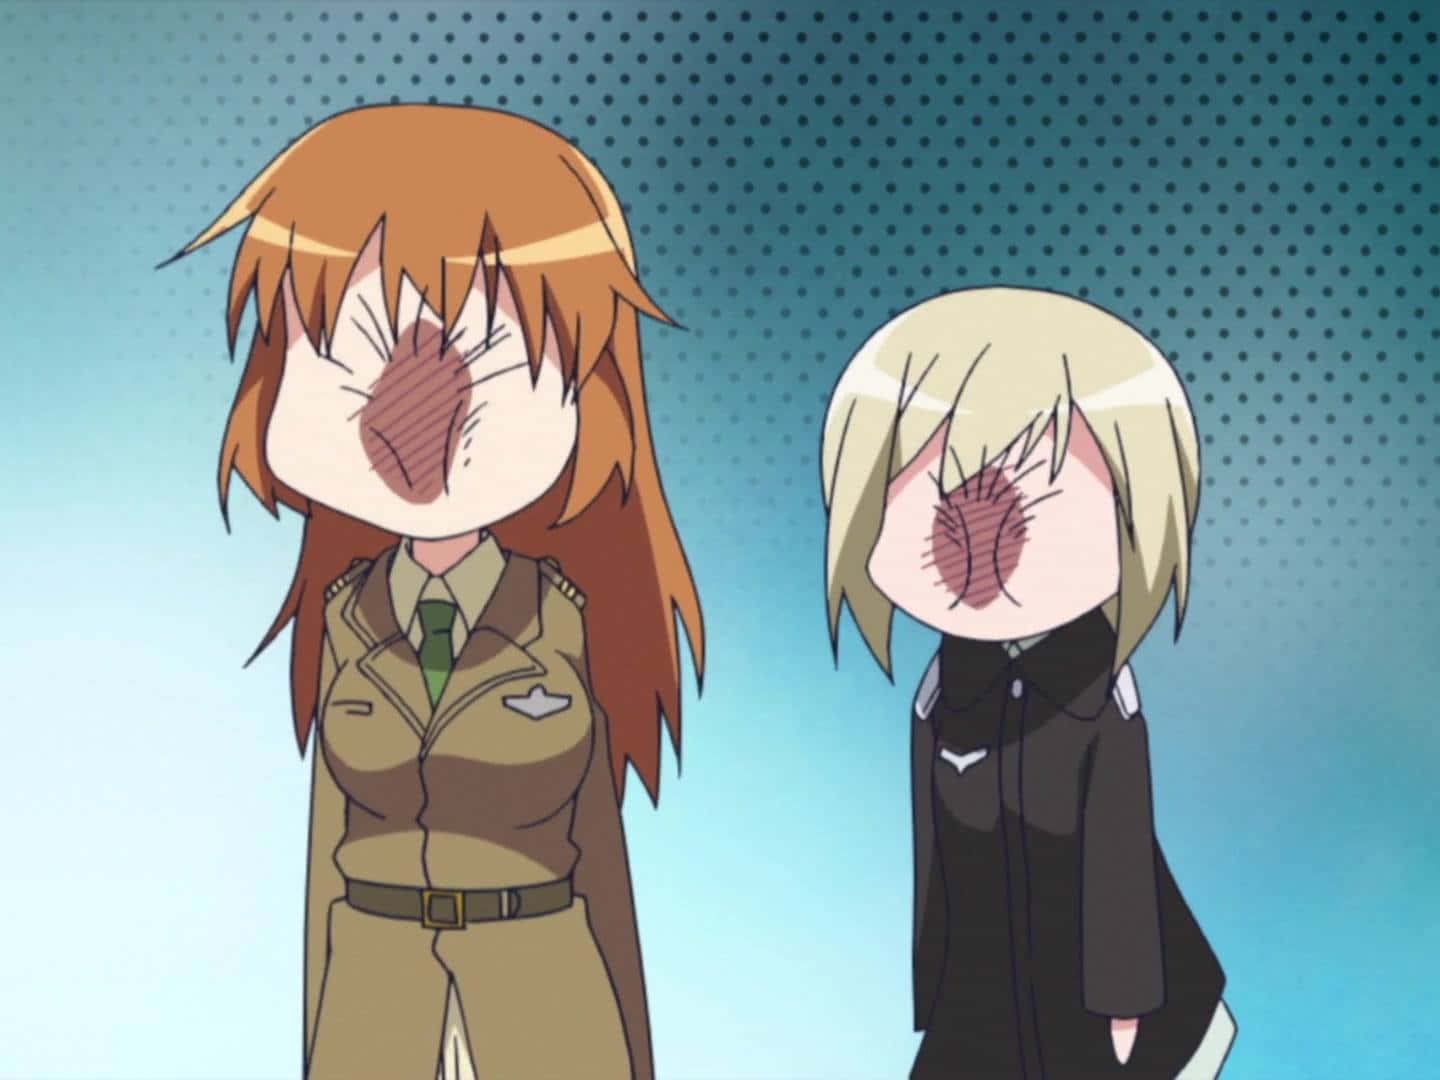 Two Anime Girls With Their Faces Covered